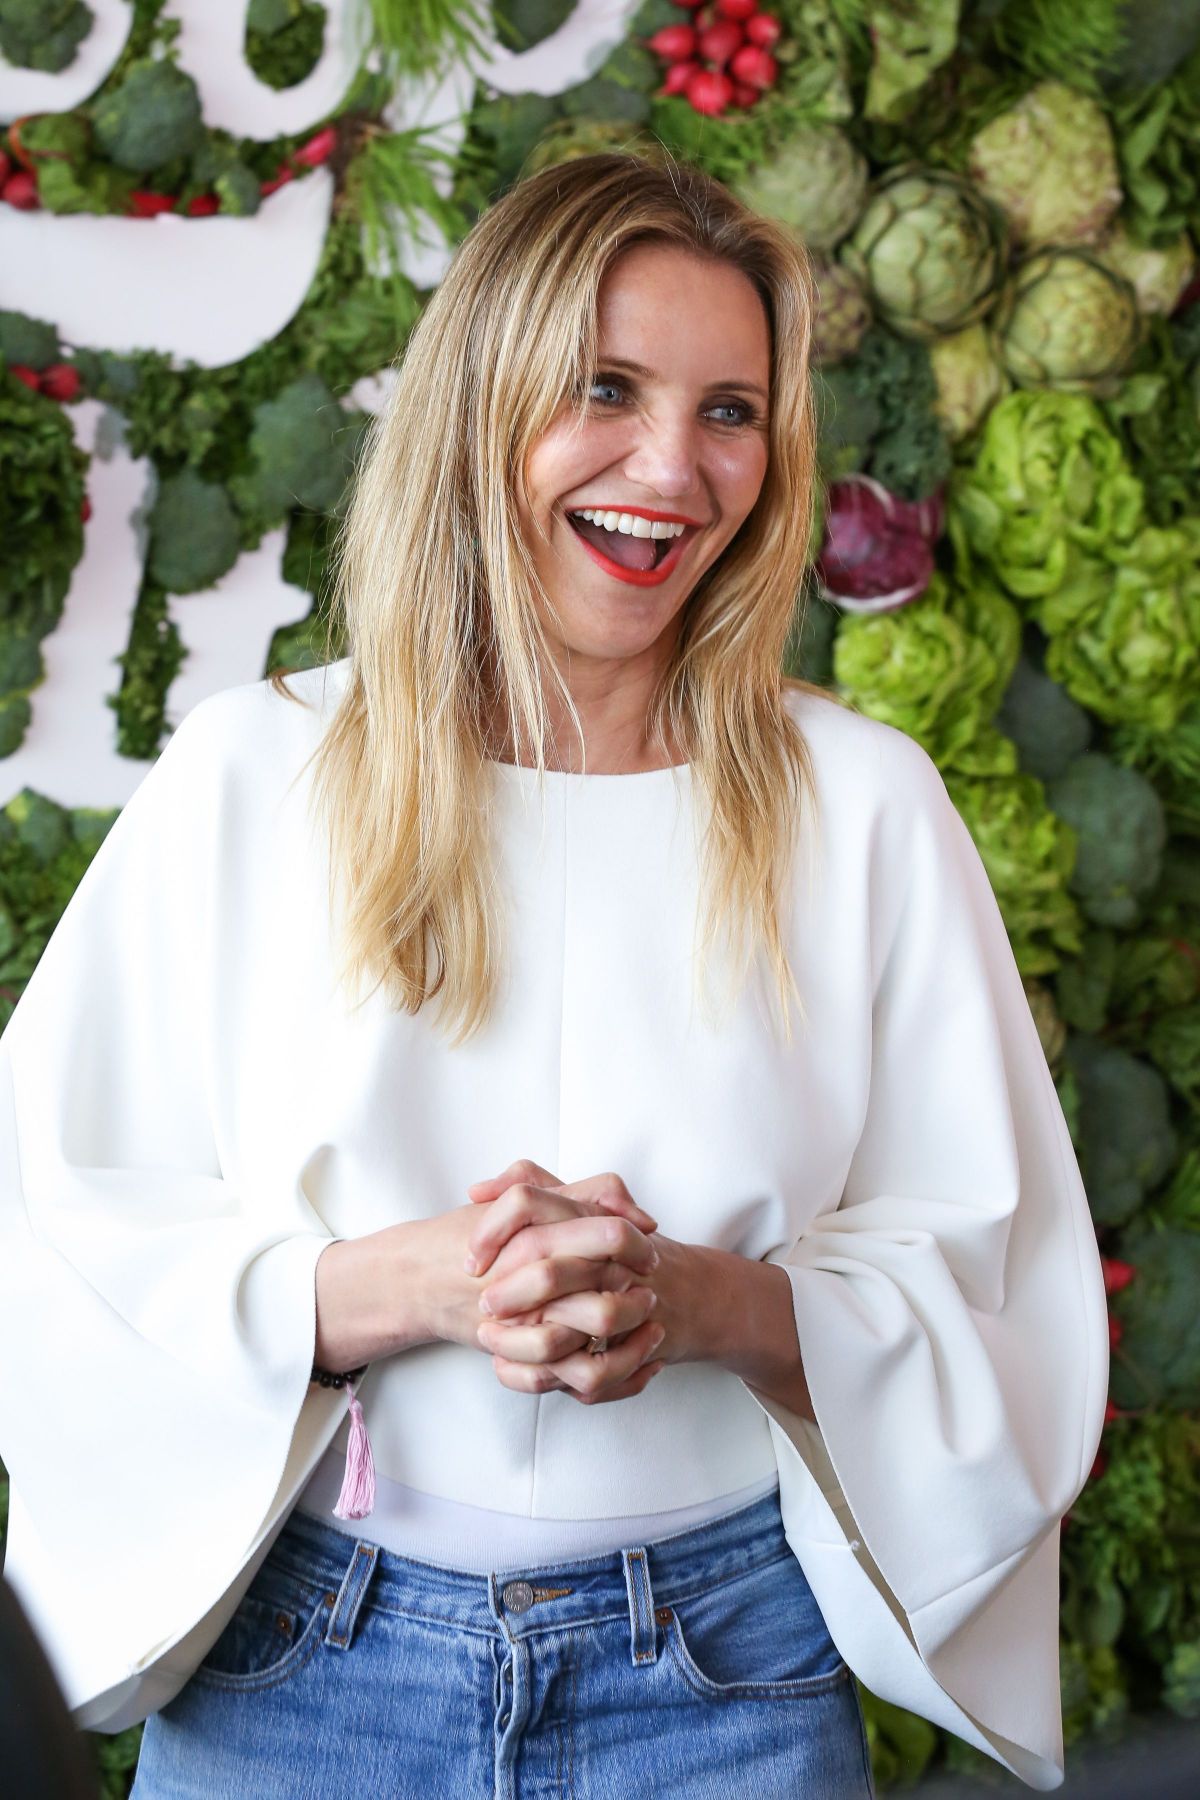 CAMERON DIAZ at In Goop Health Event in Los Angeles 06/10/2017 – HawtCelebs